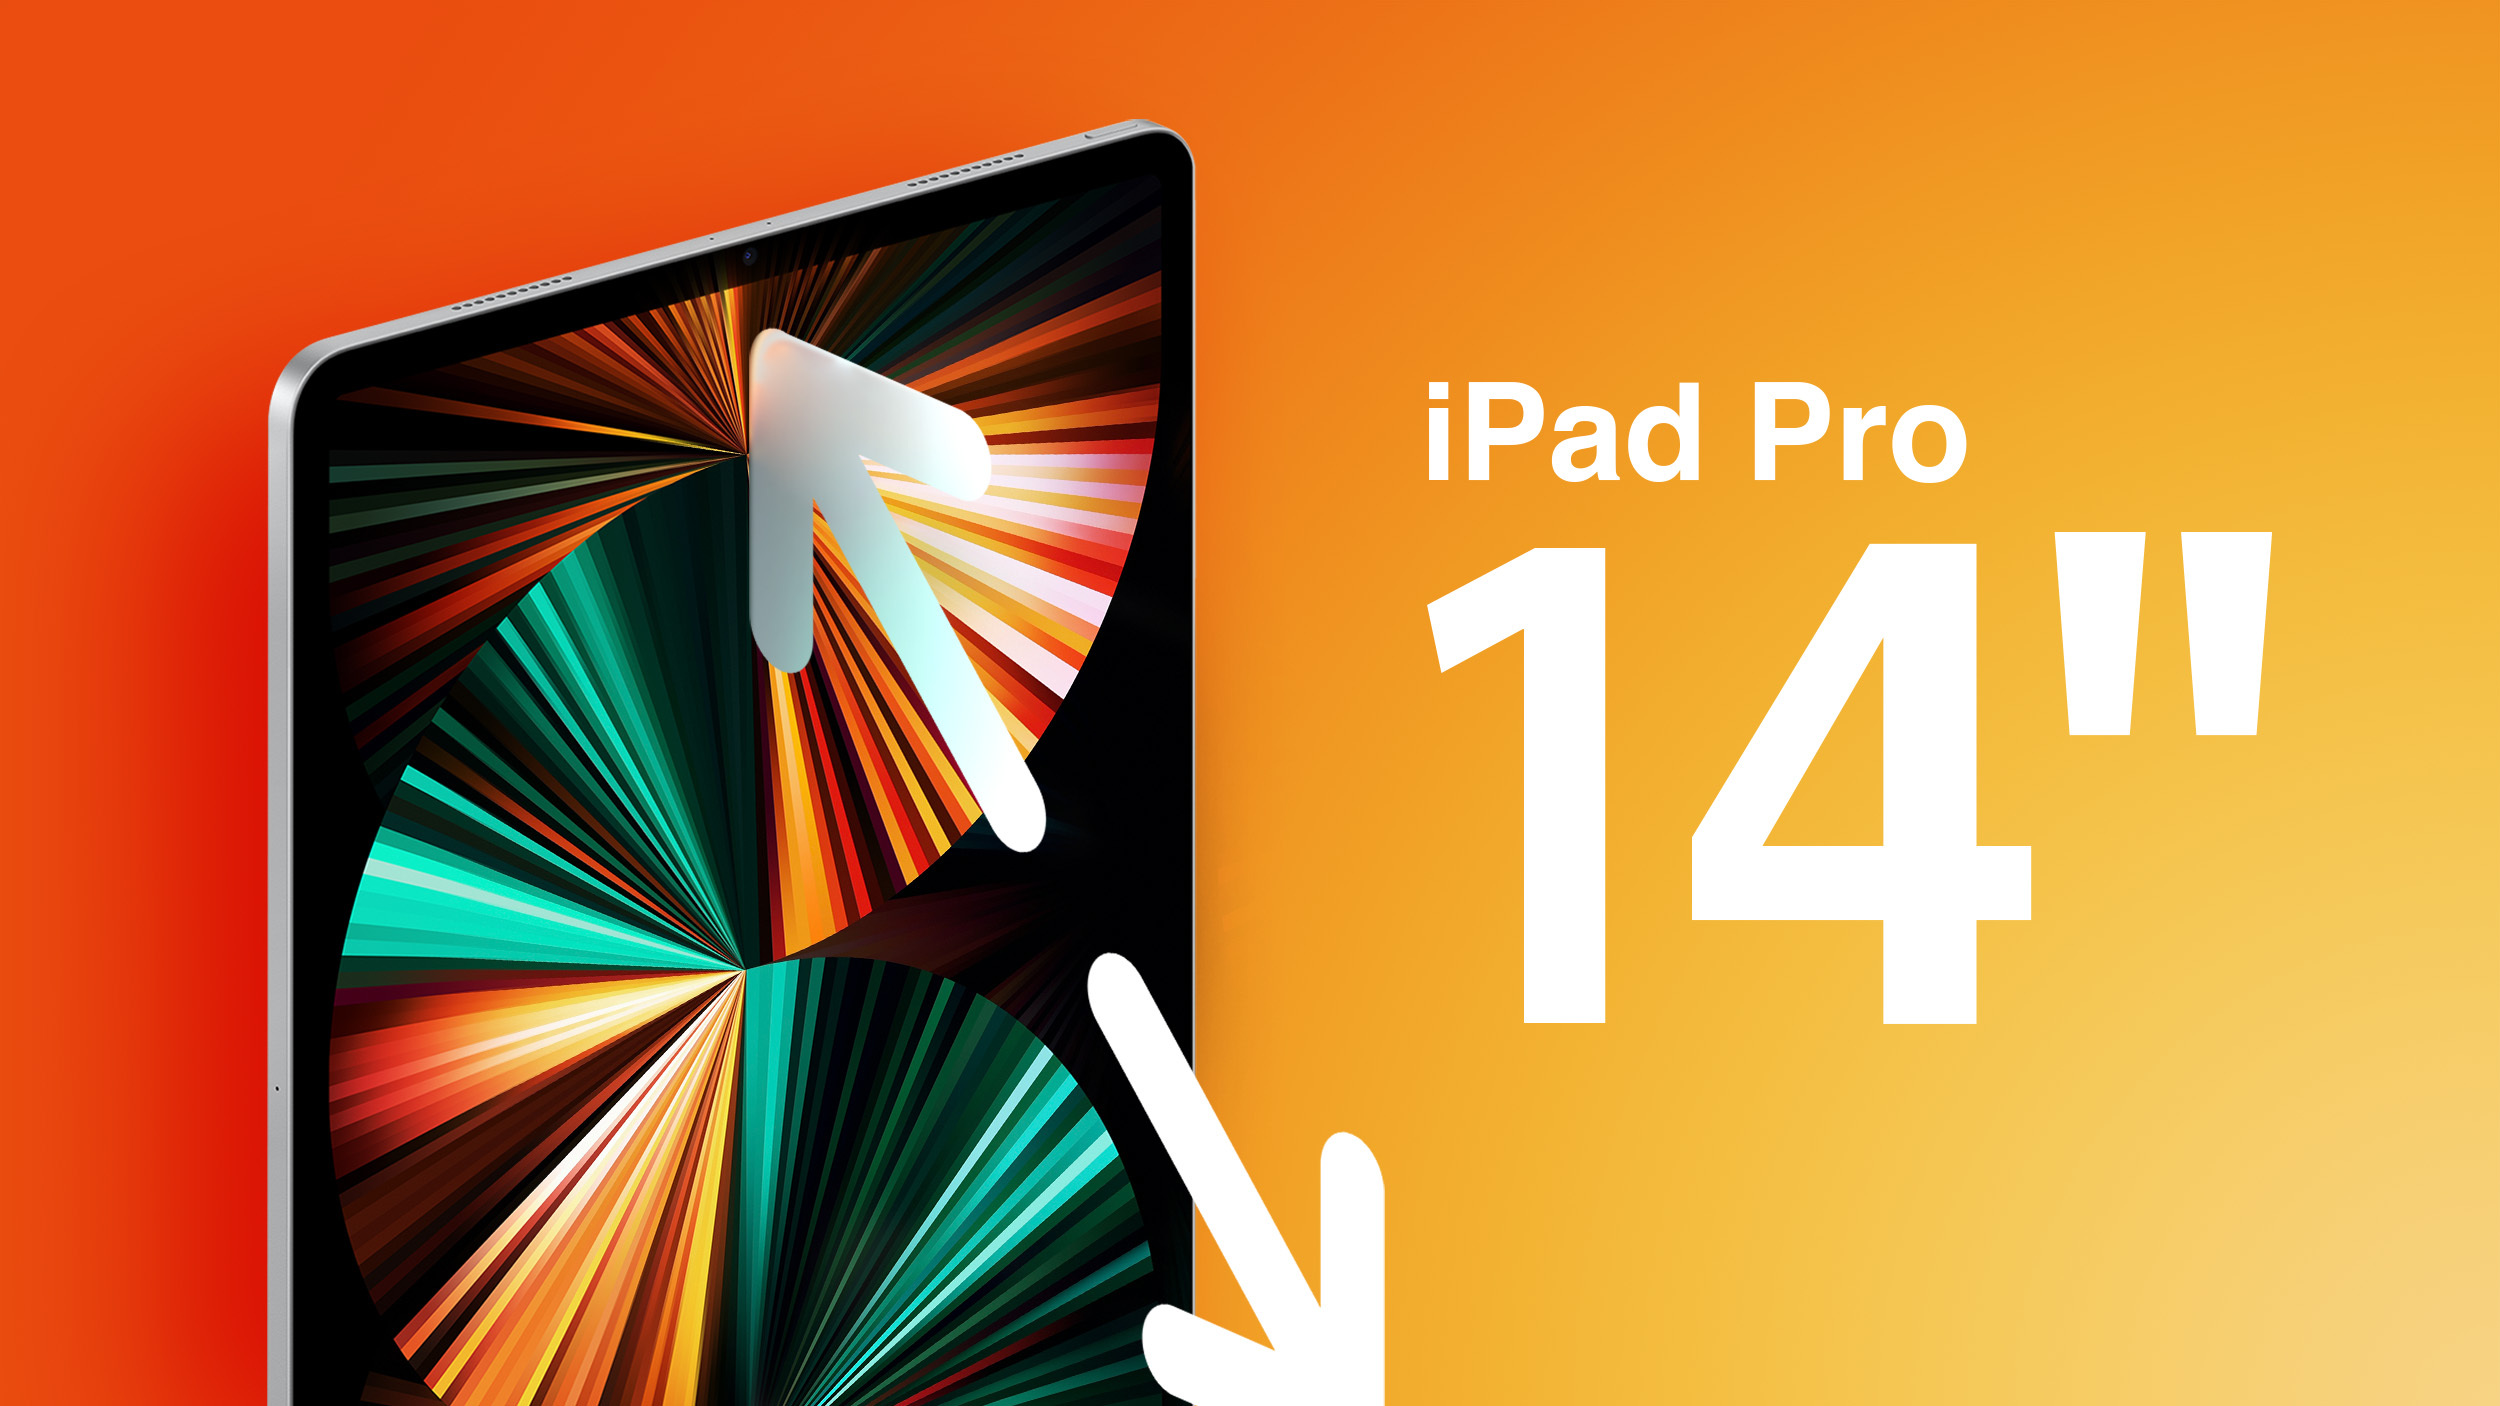 14.1-inch iPad Pro No Longer Rumored for 2023